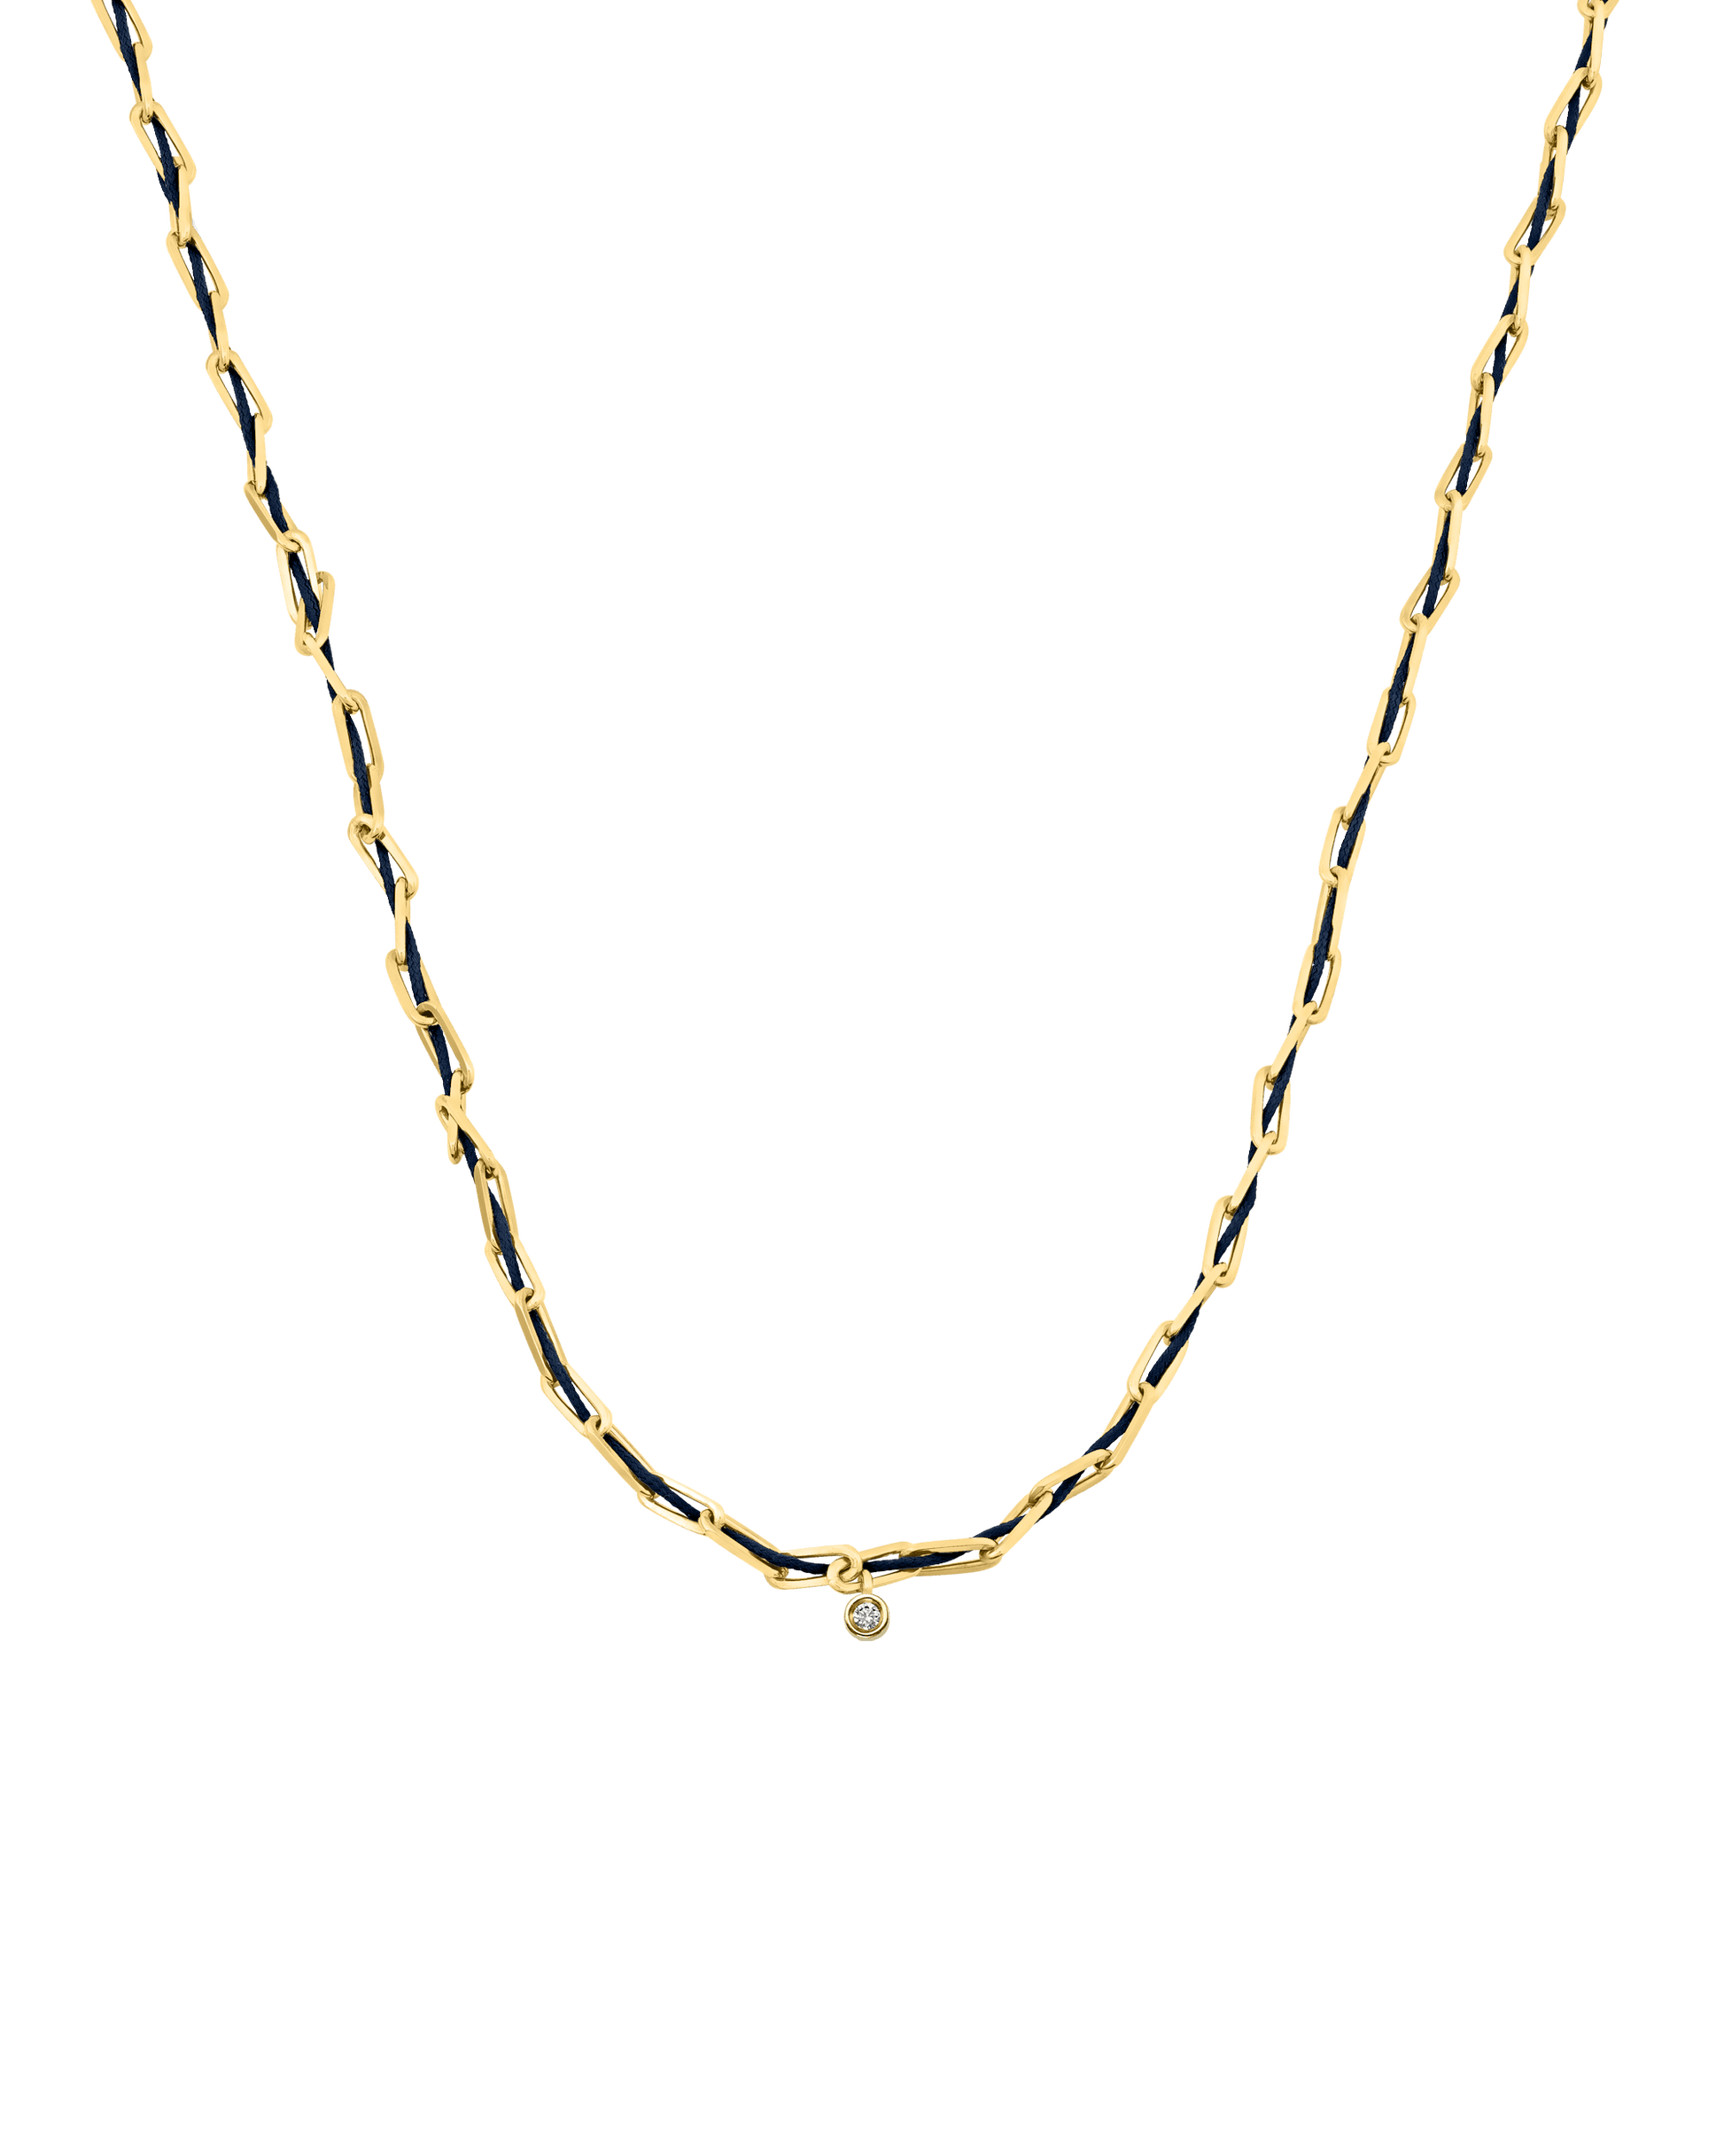 Twine Diamond Necklace - 18K Gold Vermeil Necklaces magal-dev Navy Blue Small: 0.03ct 16"